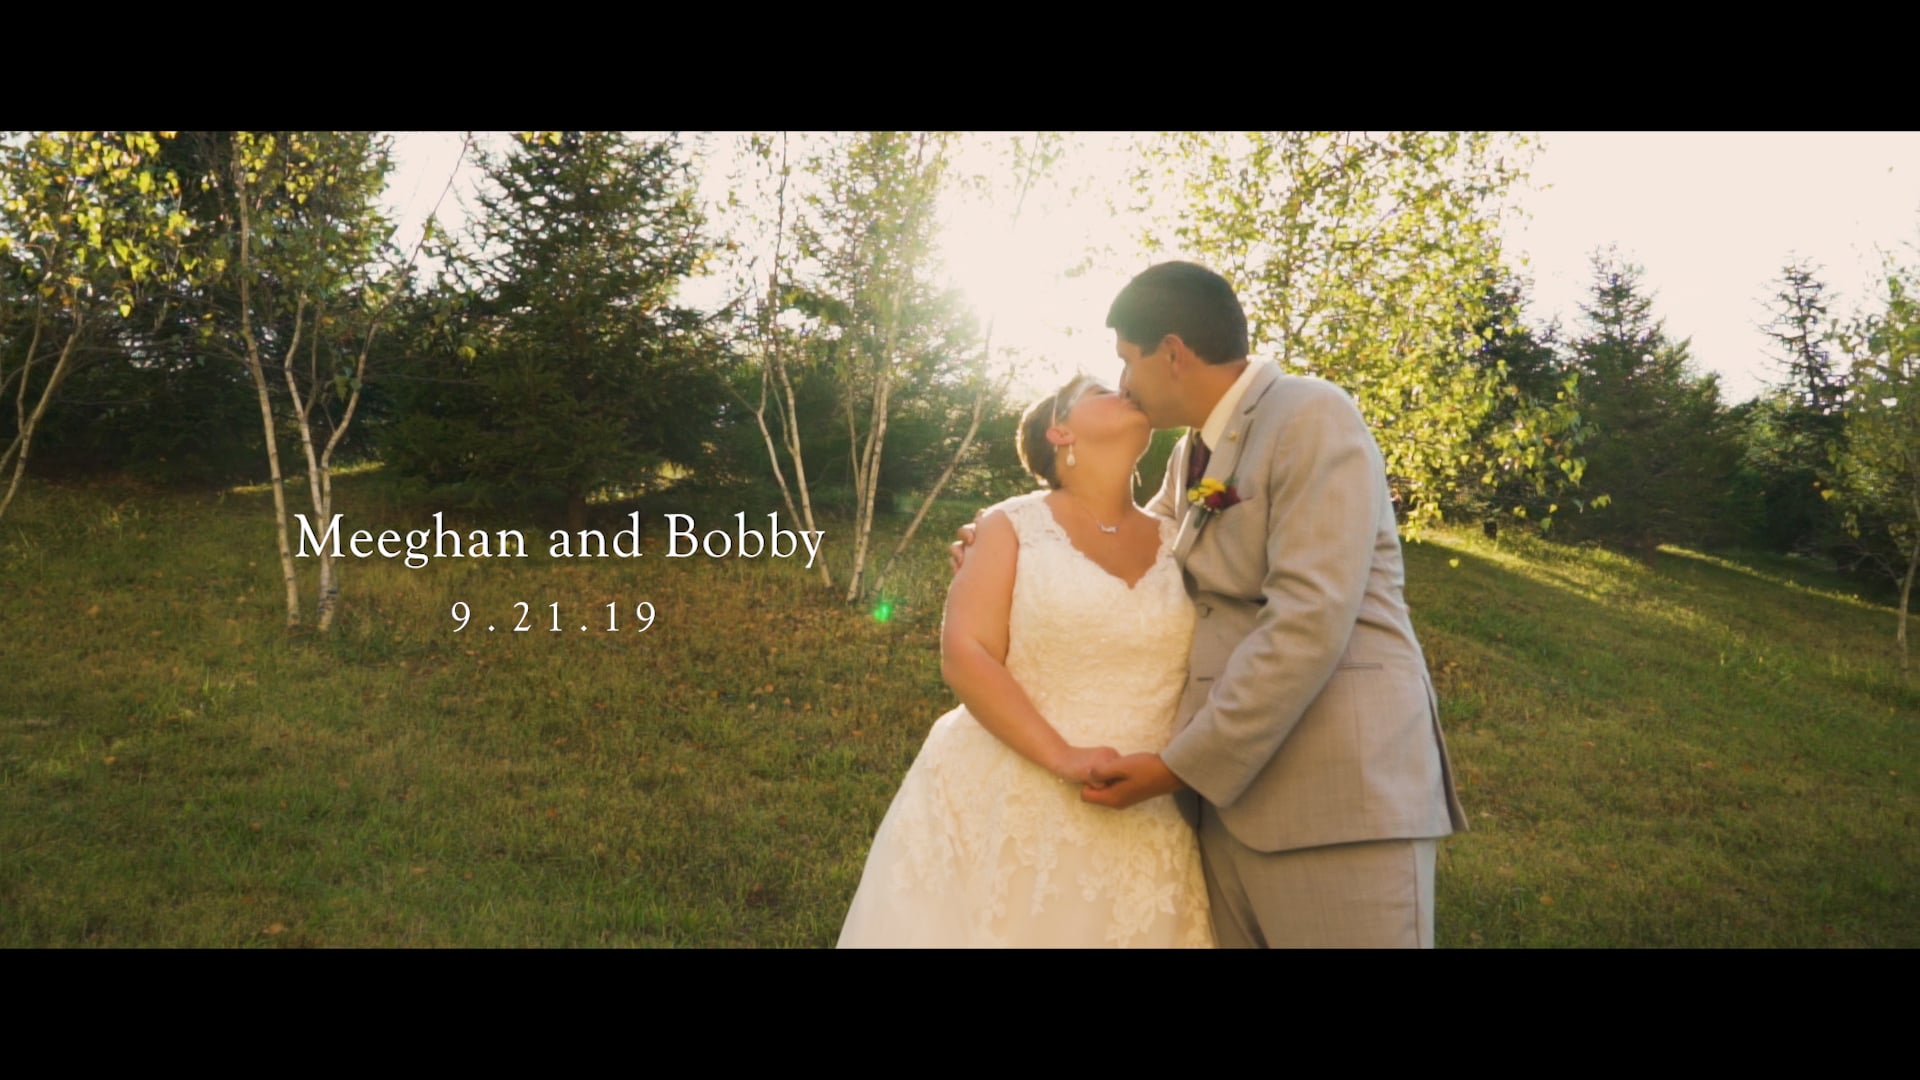 Meeghan and Bobby 9.21.19